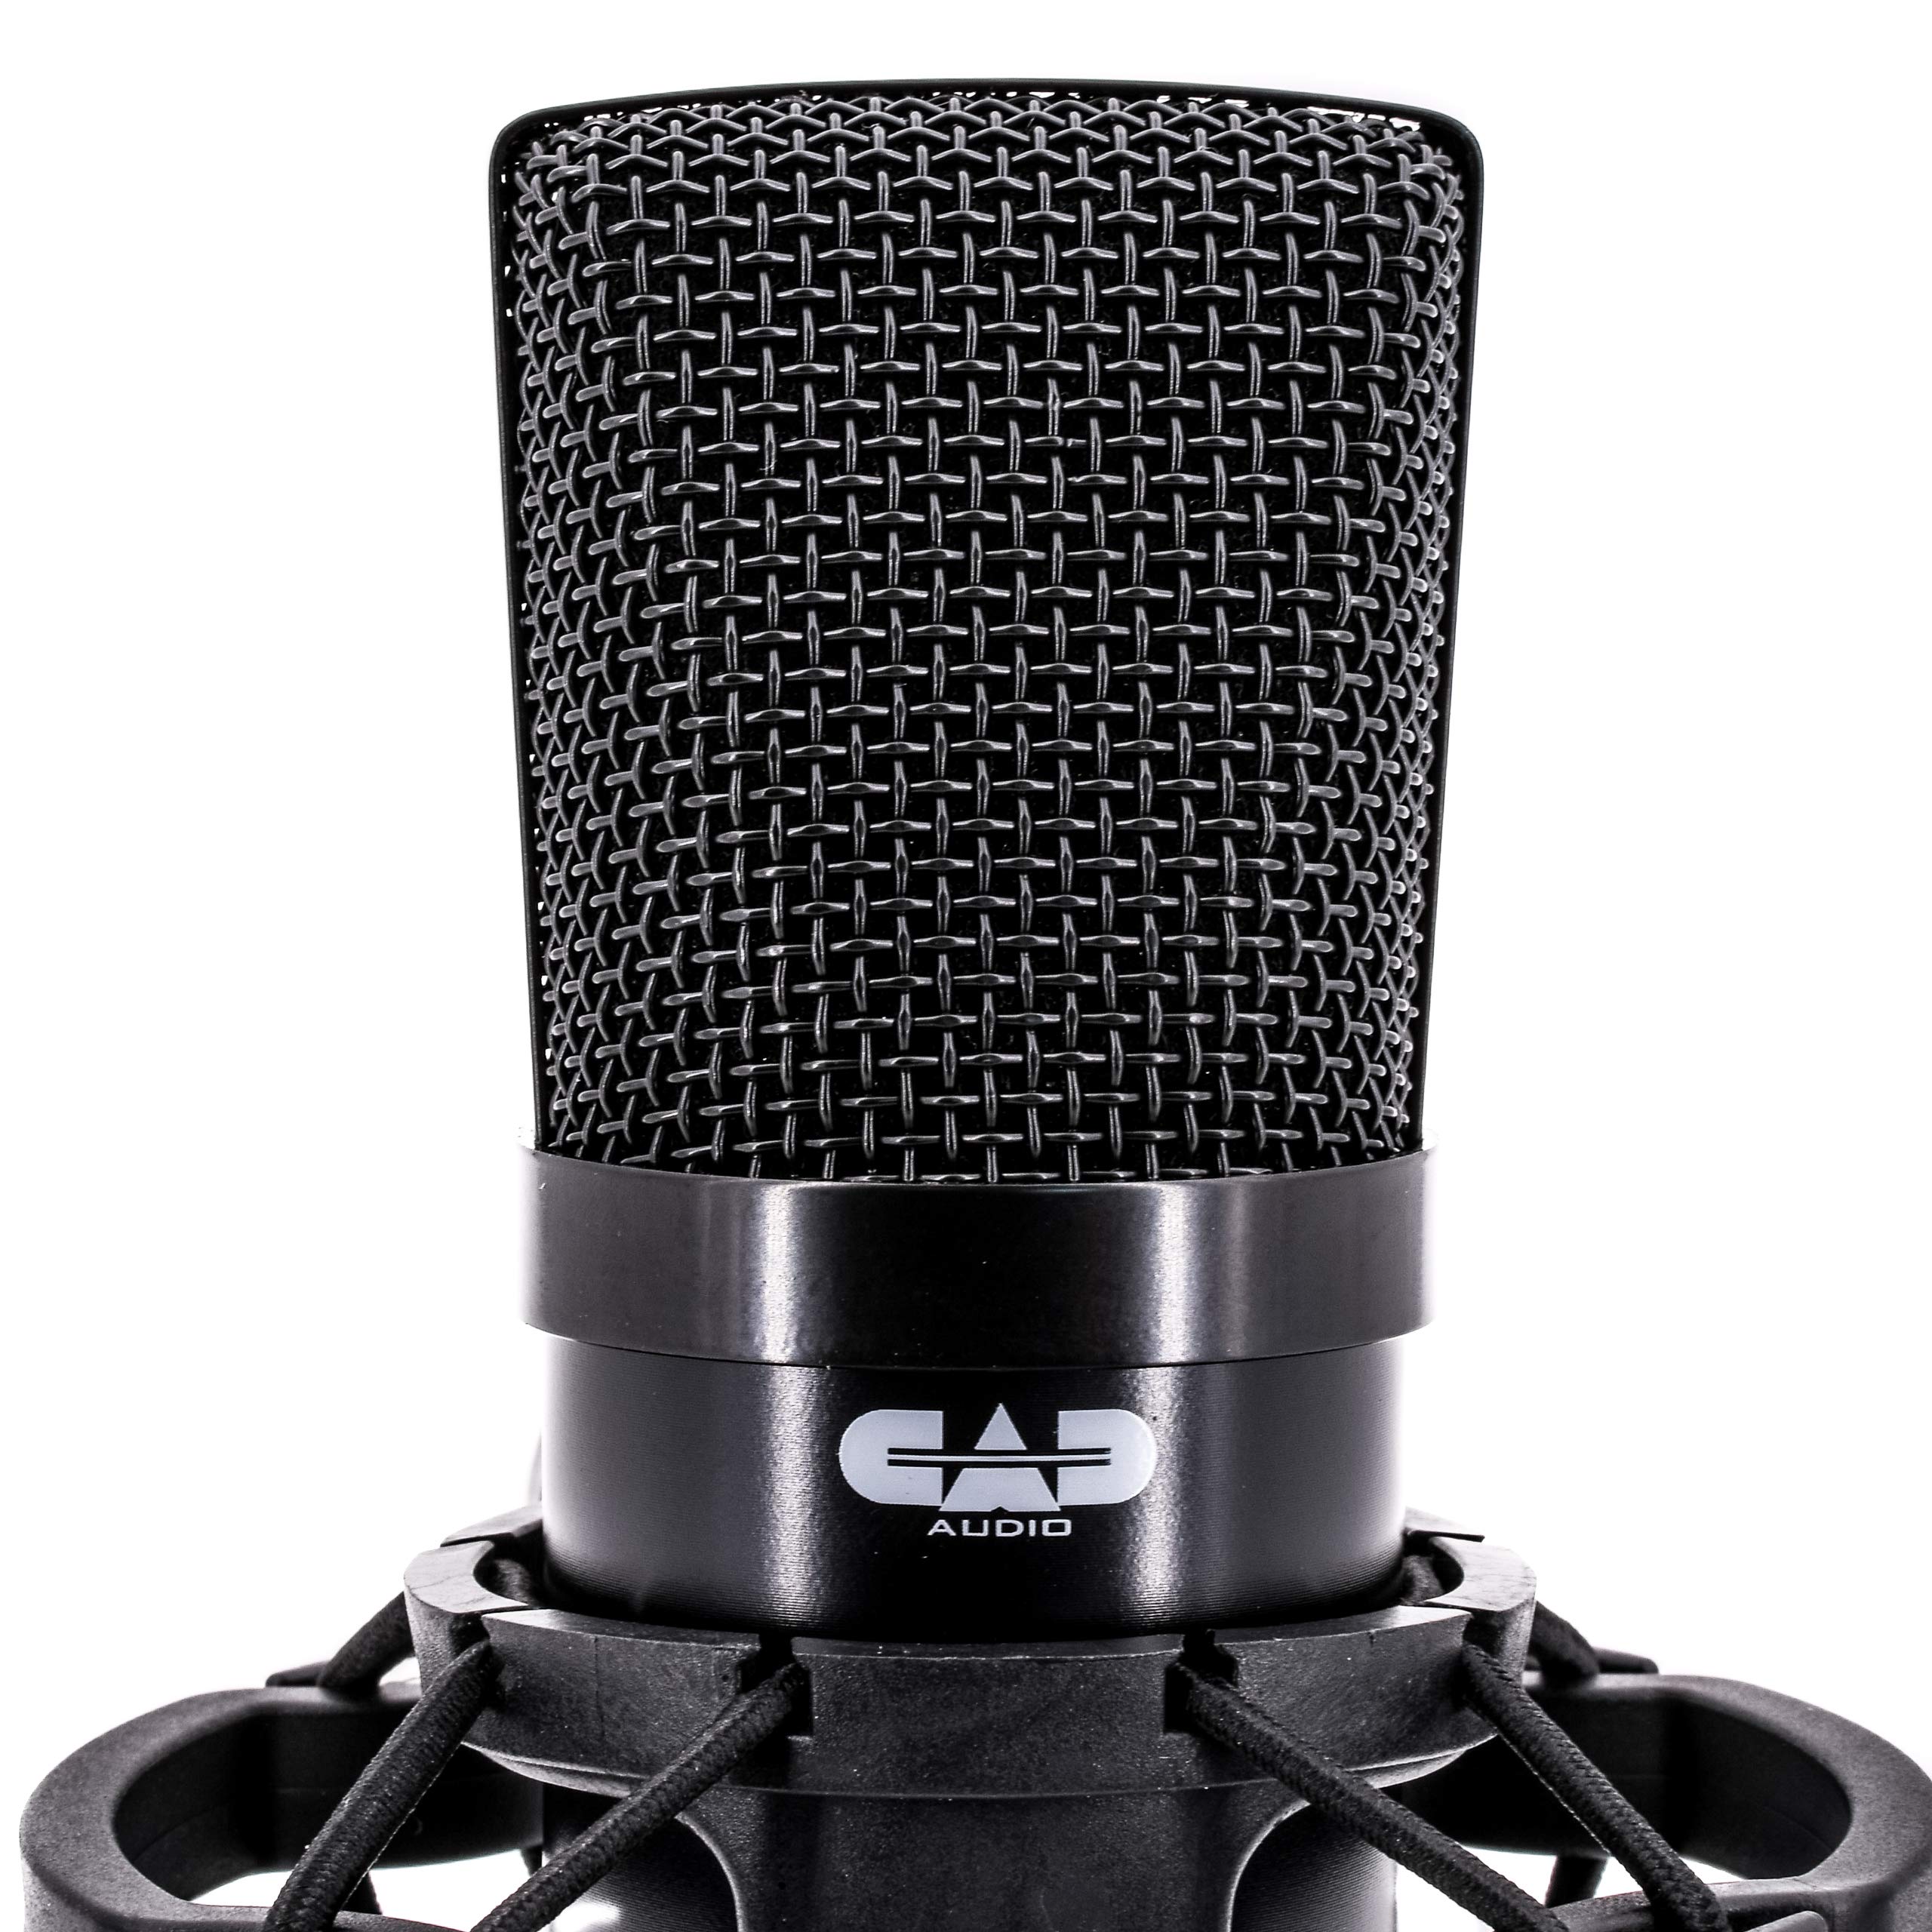 CAD Audio GXL1800 Large Format Side Address Condenser Microphone- Perfect for Studio, Podcasting & Streaming